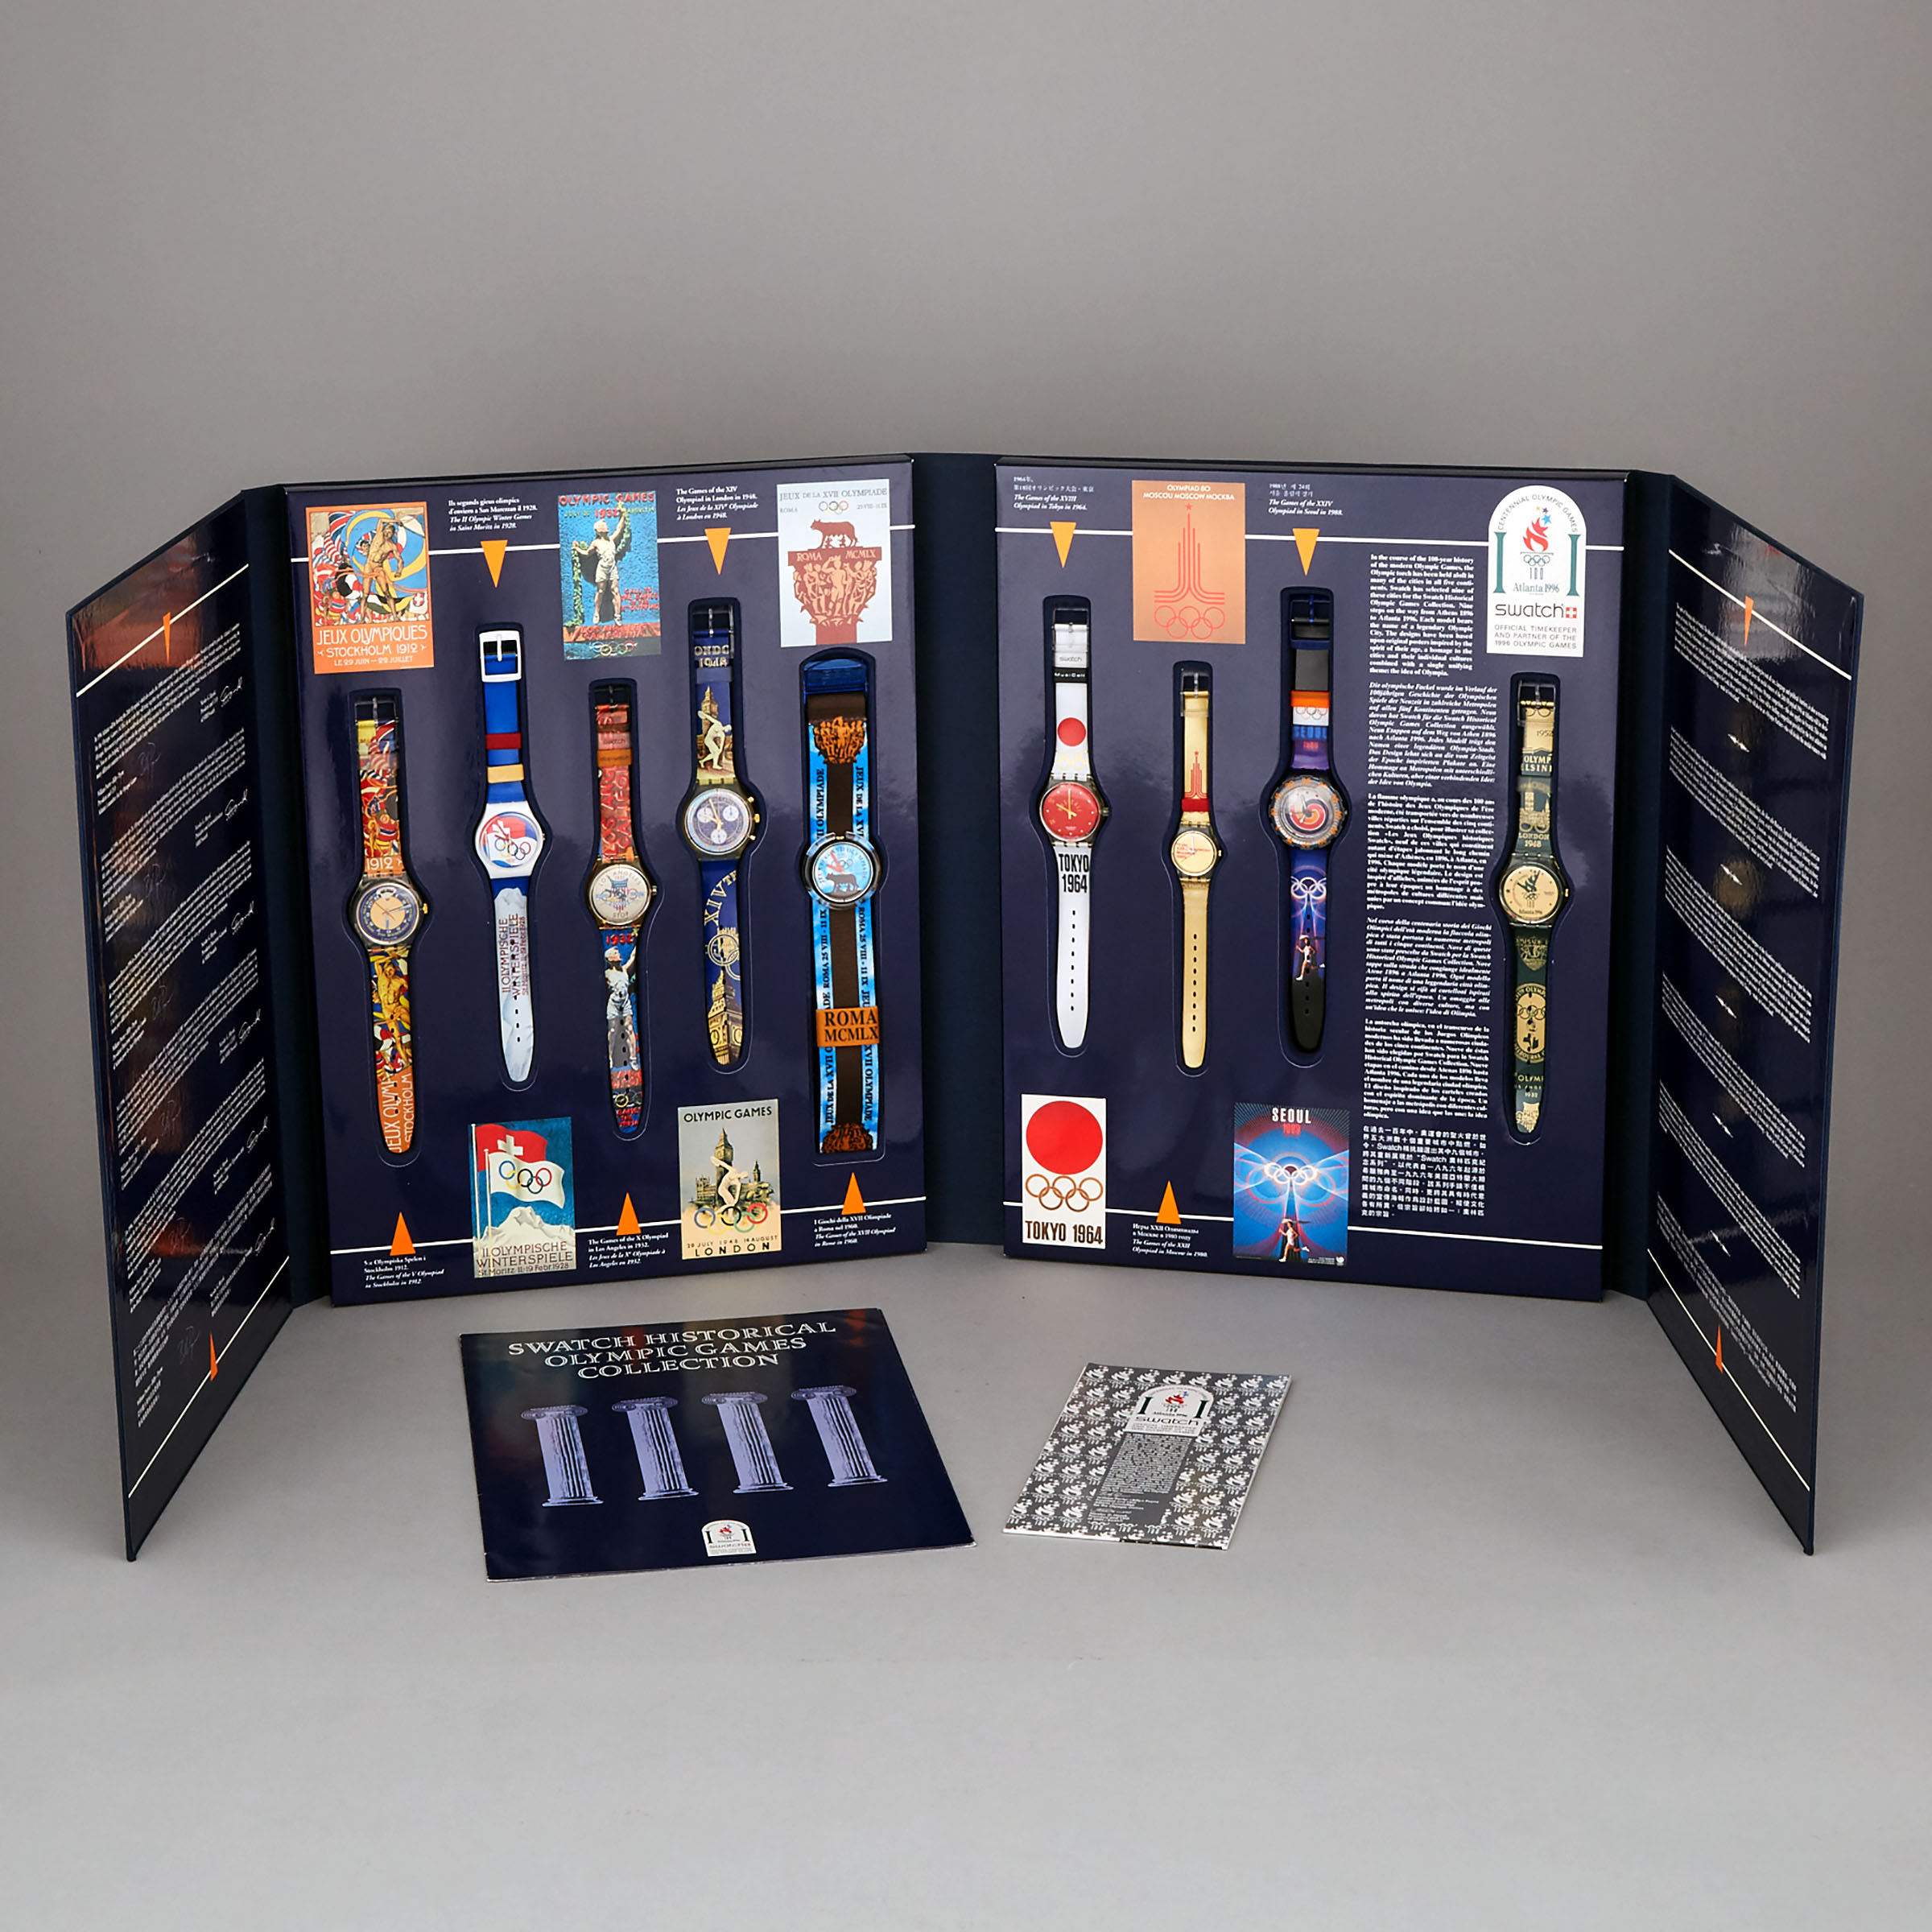 Swatch Historical Olympic Games Collection of Wristwatches, 1996